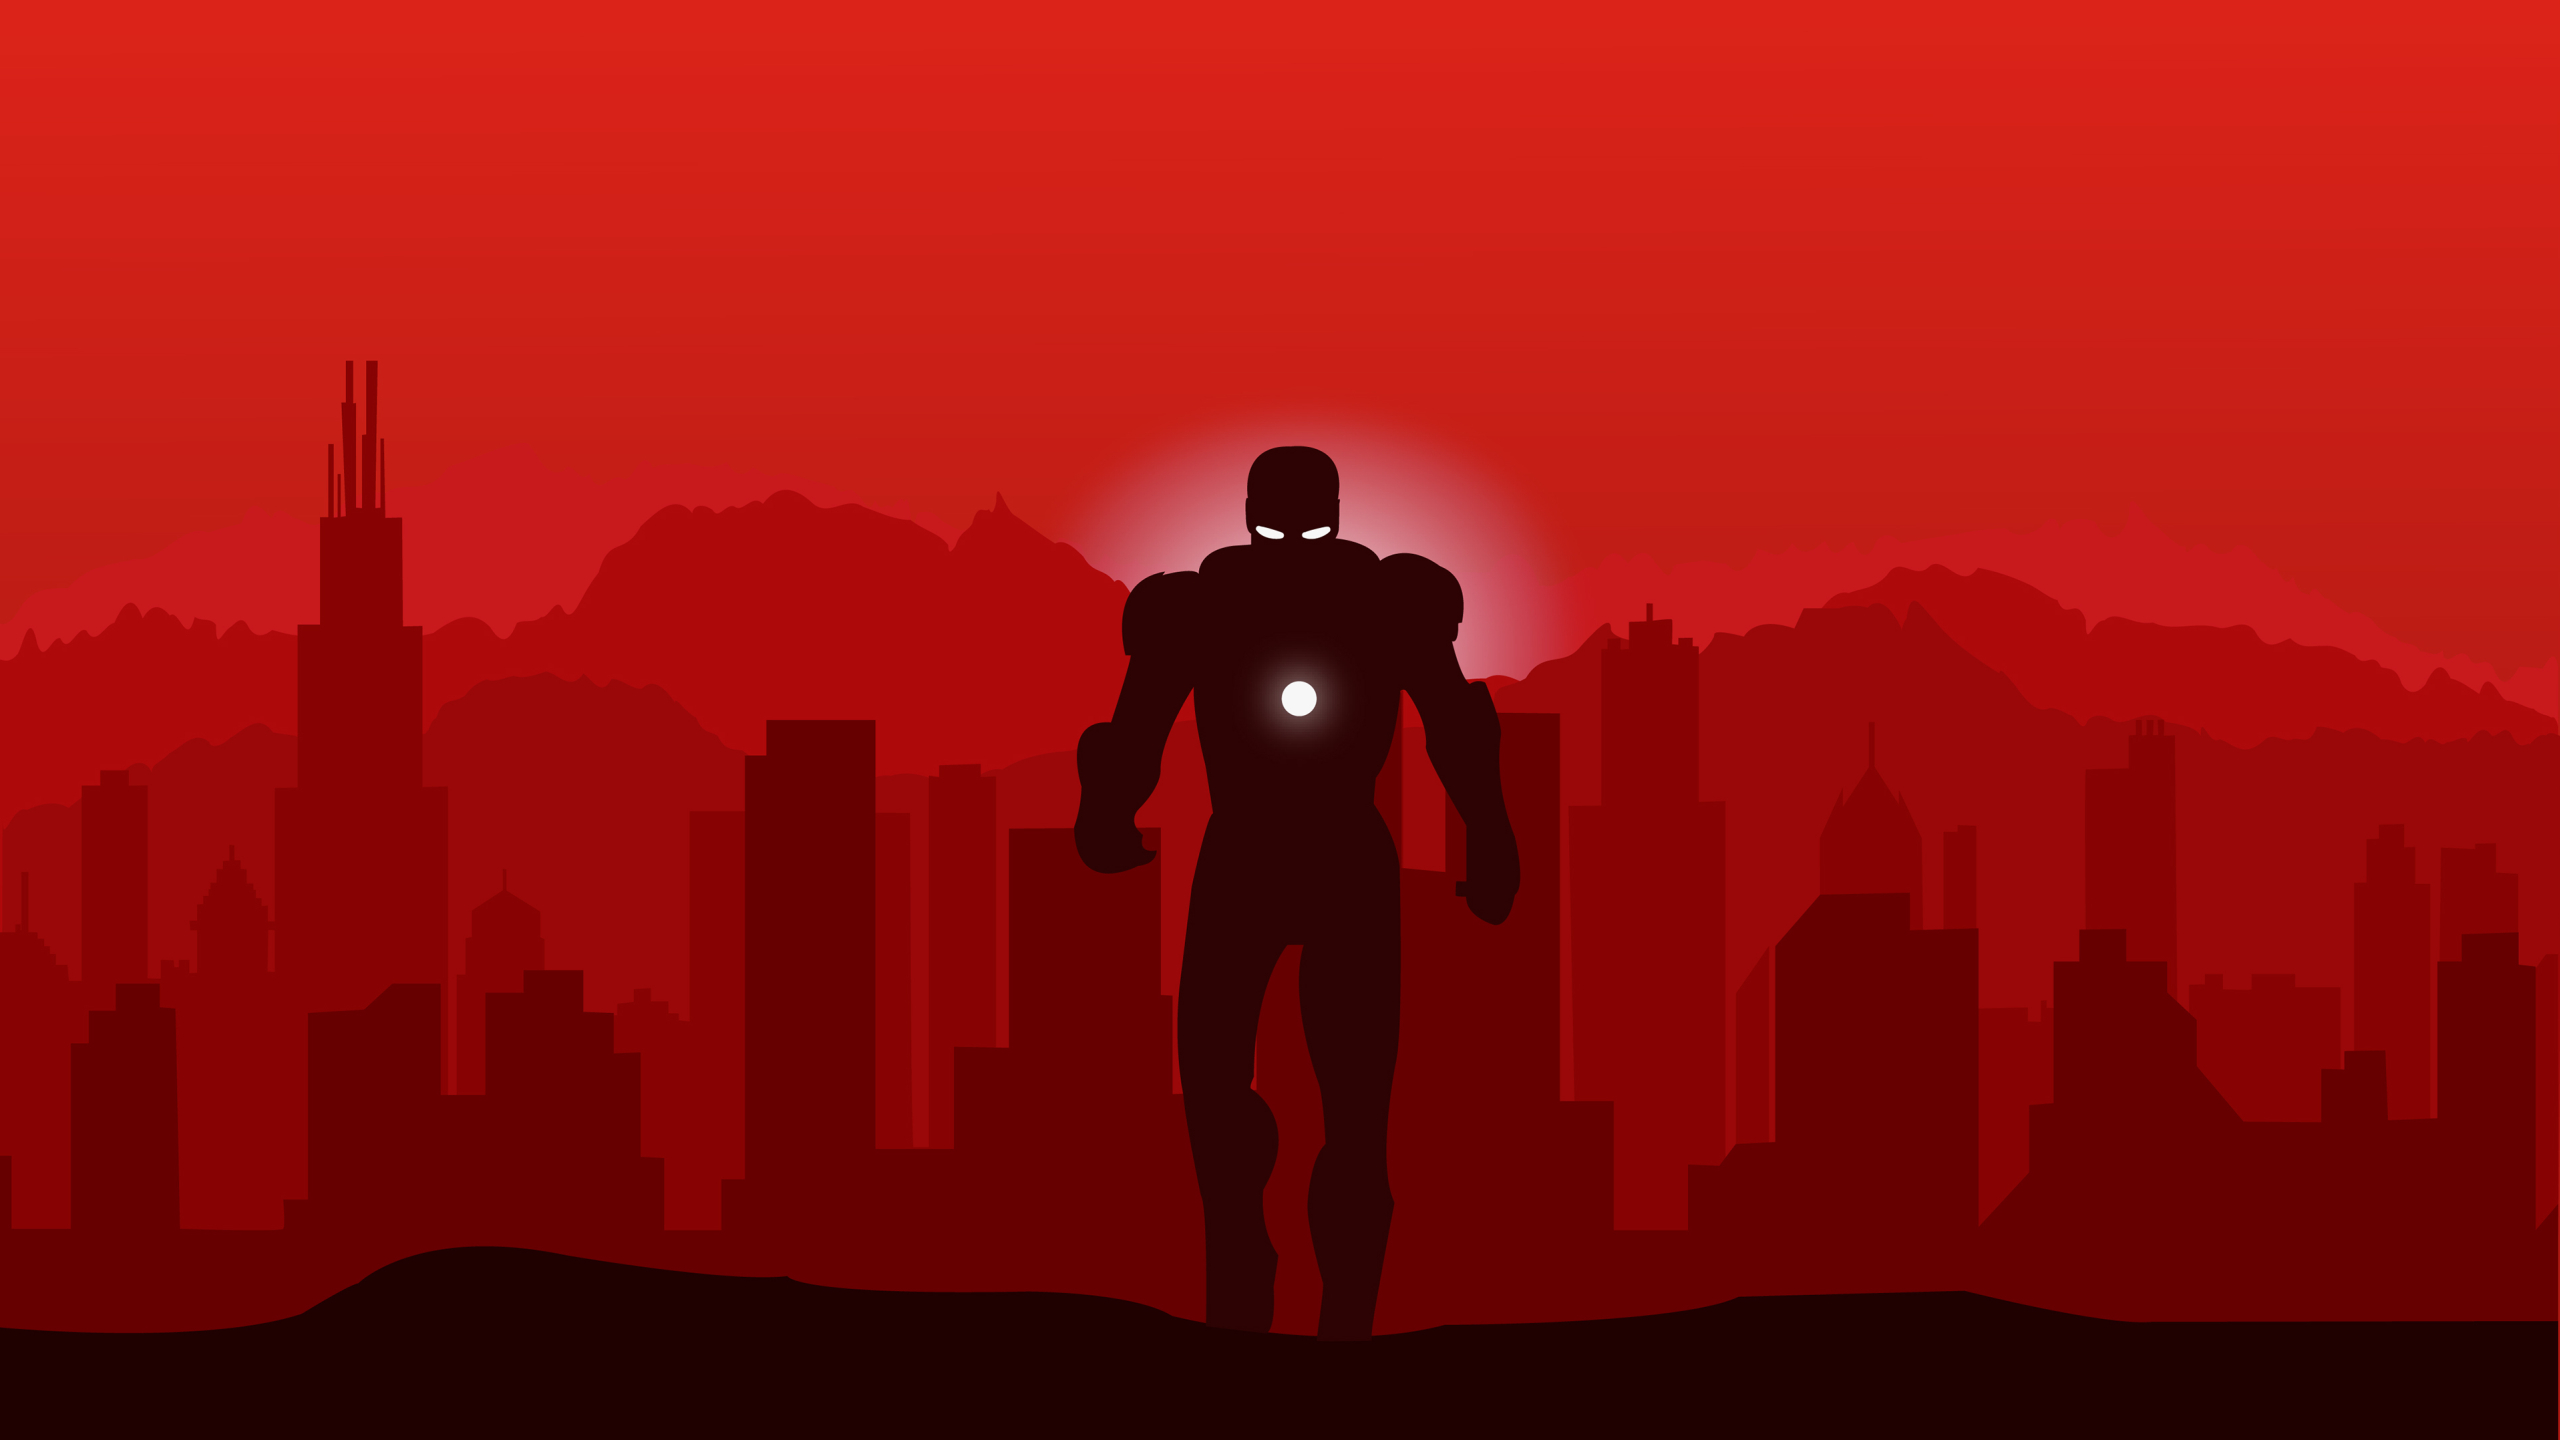 2560x1440 Marvel Iron Man Minimalist 1440p Resolution Wallpaper Hd Minimalist 4k Wallpapers Images Photos And Background Wallpapers Den